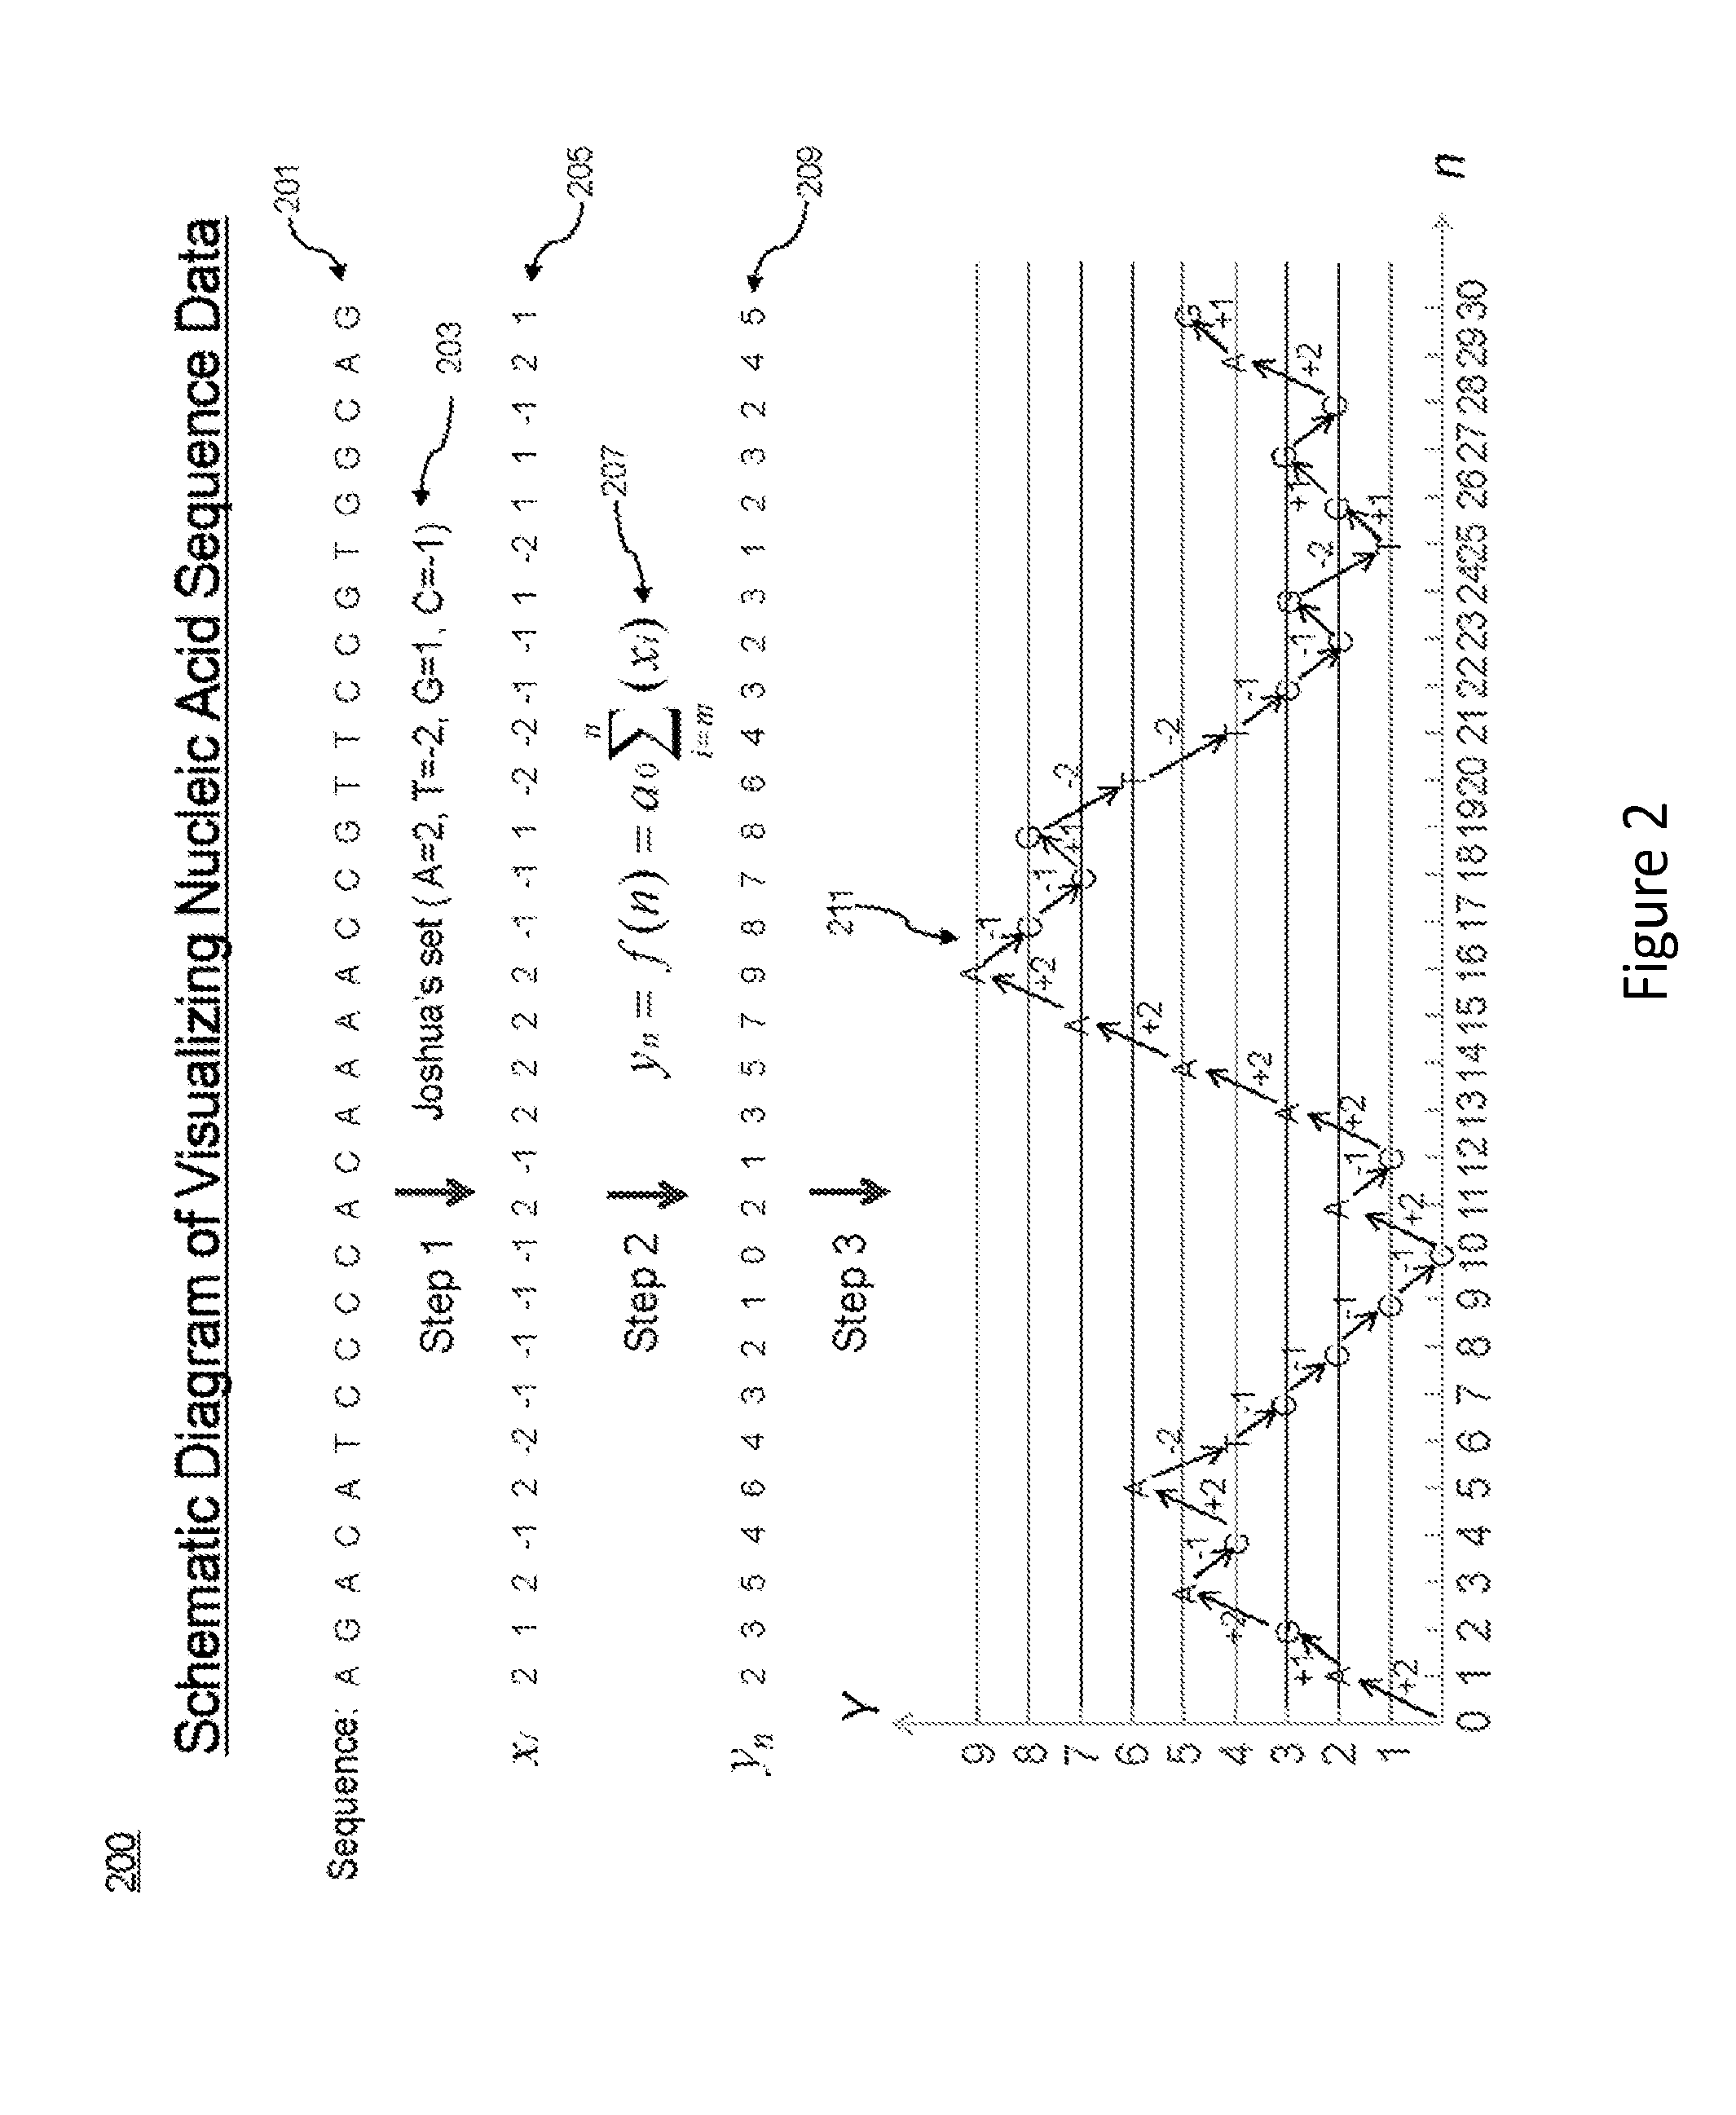 Visualization of nucleic acid sequences